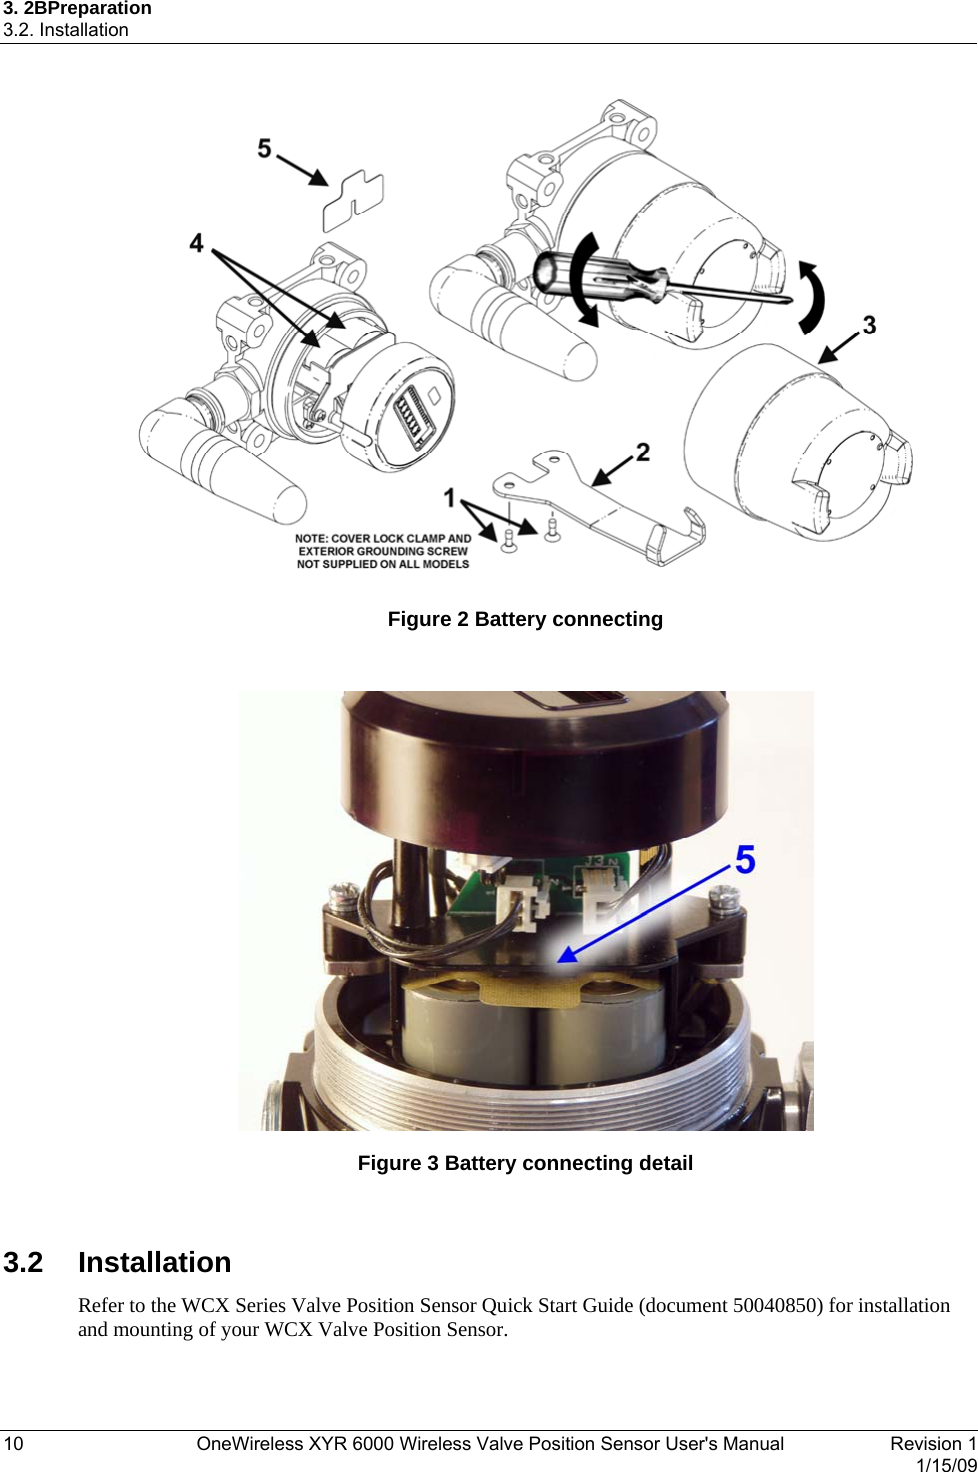 3. 2BPreparation 3.2. Installation   Figure 2 Battery connecting   Figure 3 Battery connecting detail  3.2 Installation Refer to the WCX Series Valve Position Sensor Quick Start Guide (document 50040850) for installation and mounting of your WCX Valve Position Sensor. 10  OneWireless XYR 6000 Wireless Valve Position Sensor User&apos;s Manual   Revision 1   1/15/09 